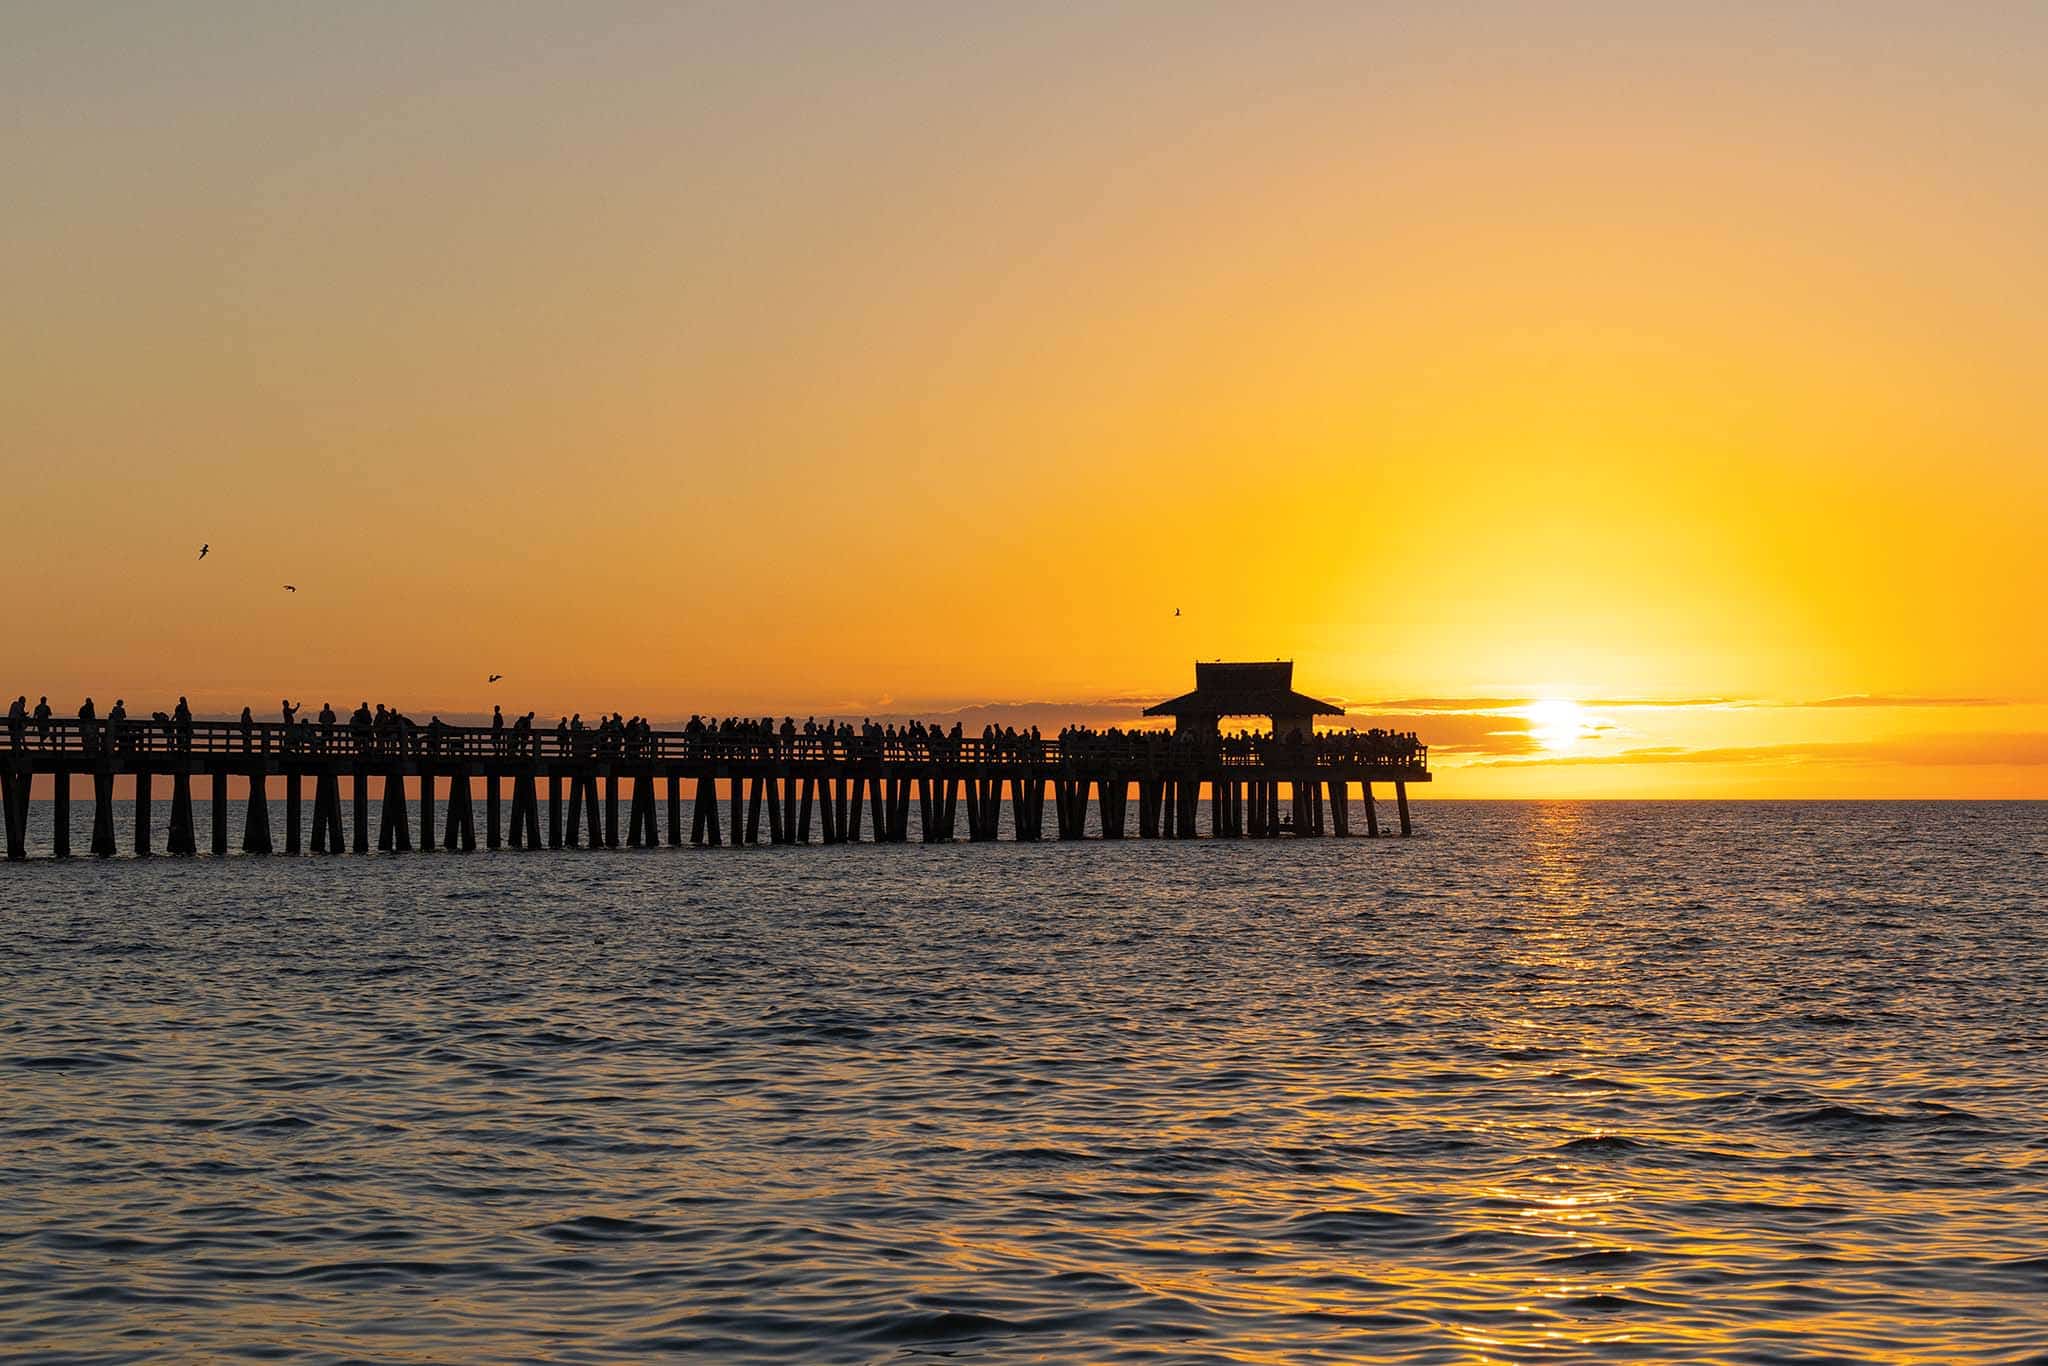 TAKE IN SCENIC SUNSETS FROM THE NAPLES PIER.